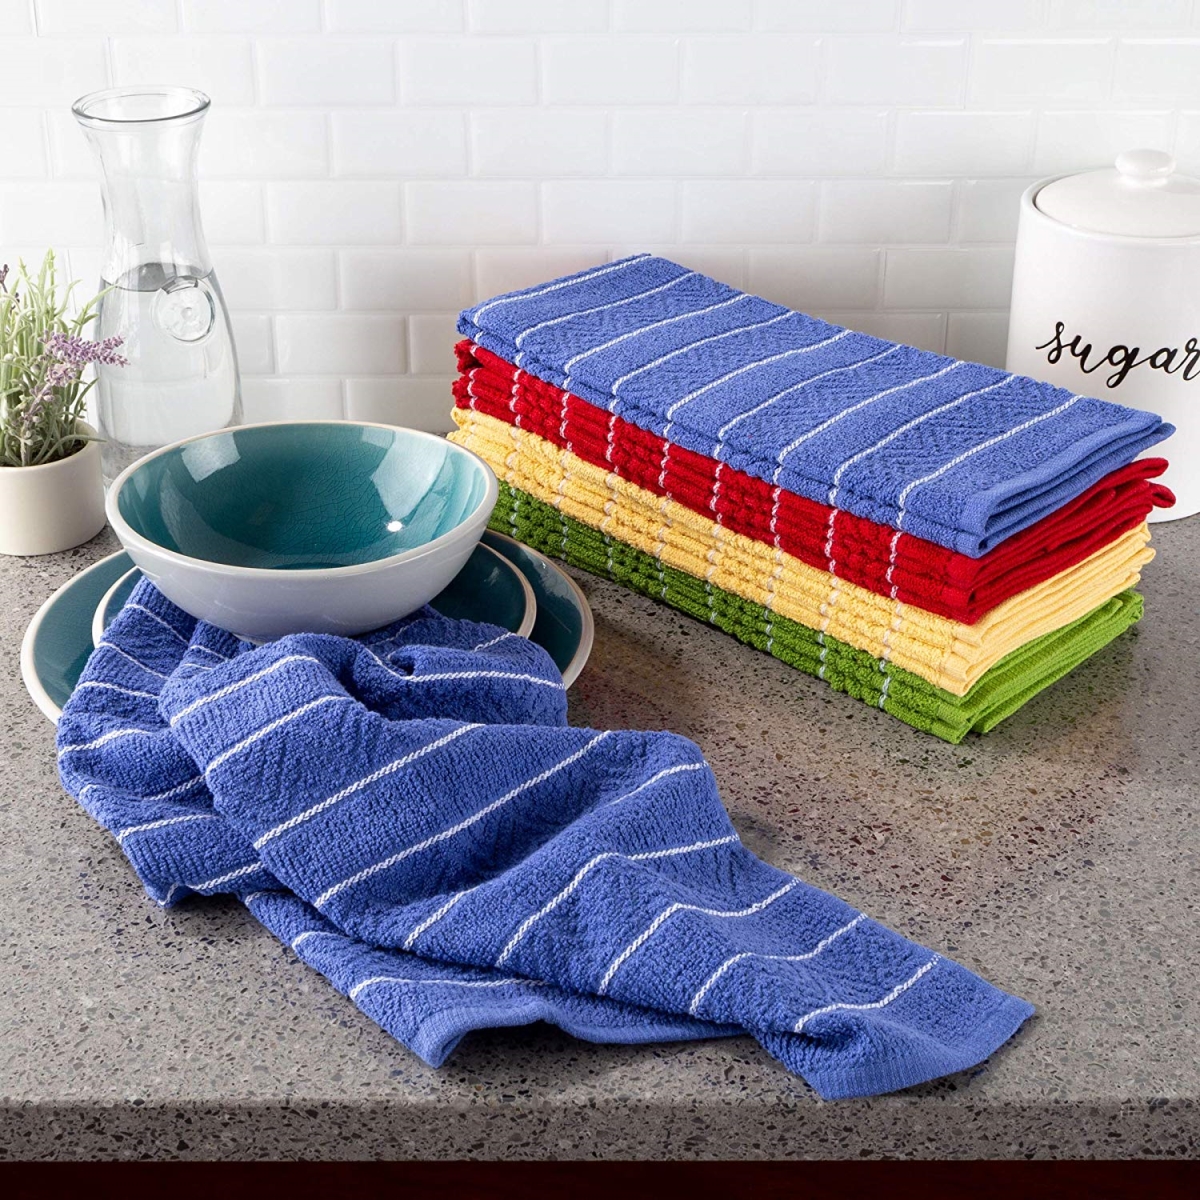 69a-39253 16 X 28 In. Home Kitchen Towels, Multi-color - Set Of 8